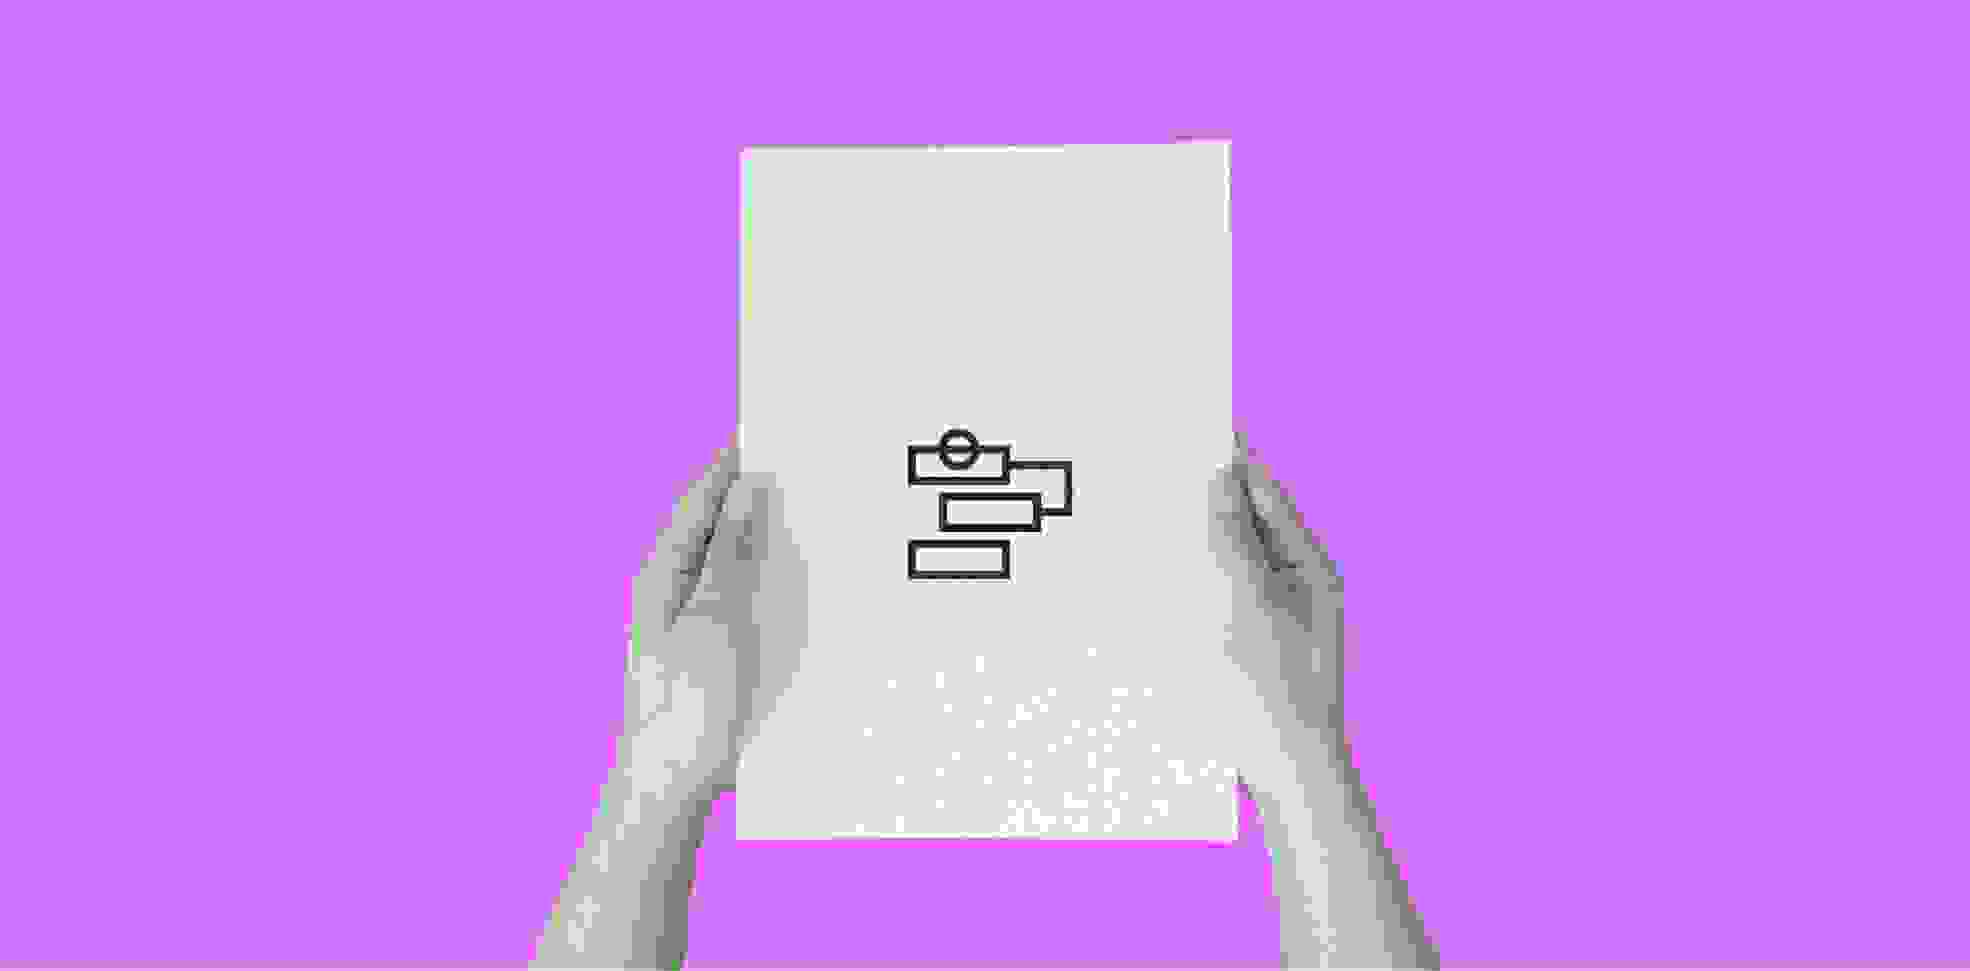 hands holding a sheet of paper with an icon, on a purple background